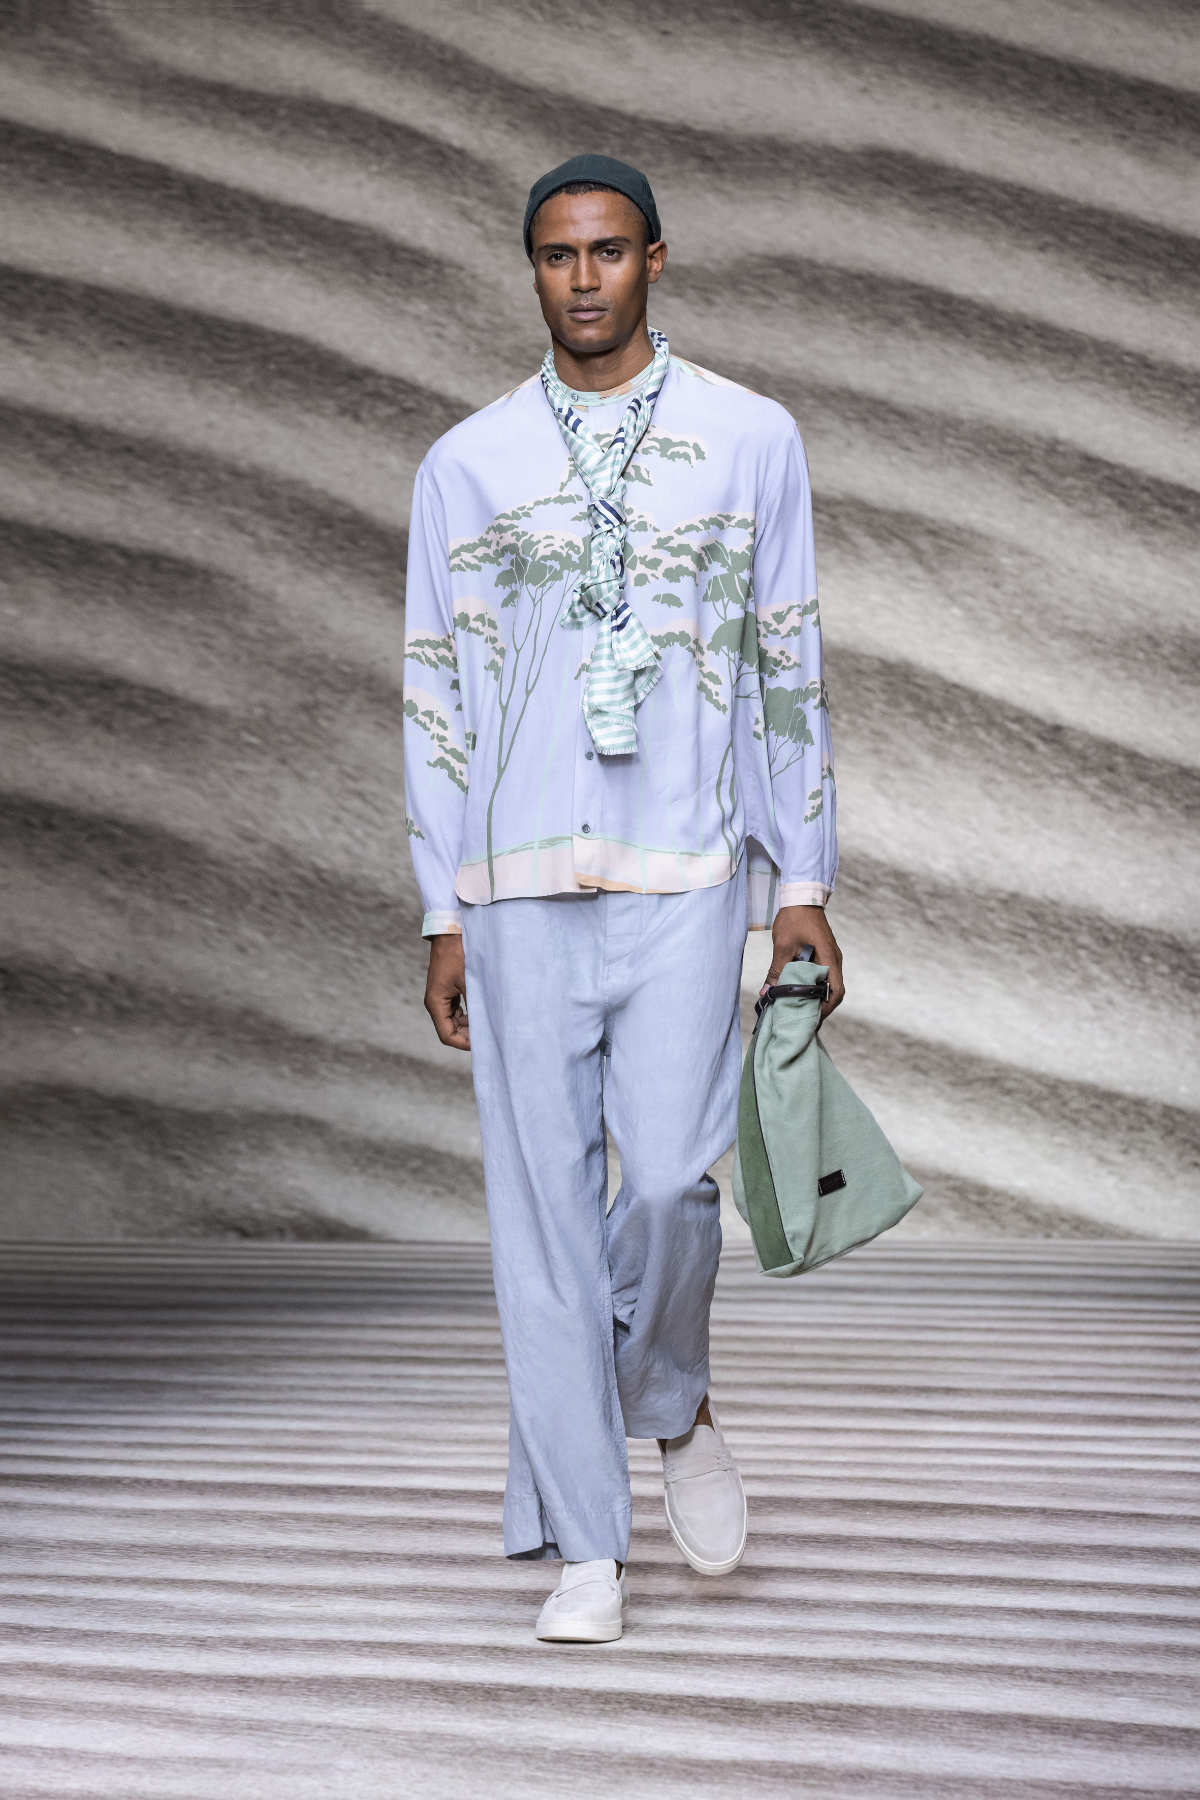 Armani Armani Presents His New Spring Summer 2023 Collection